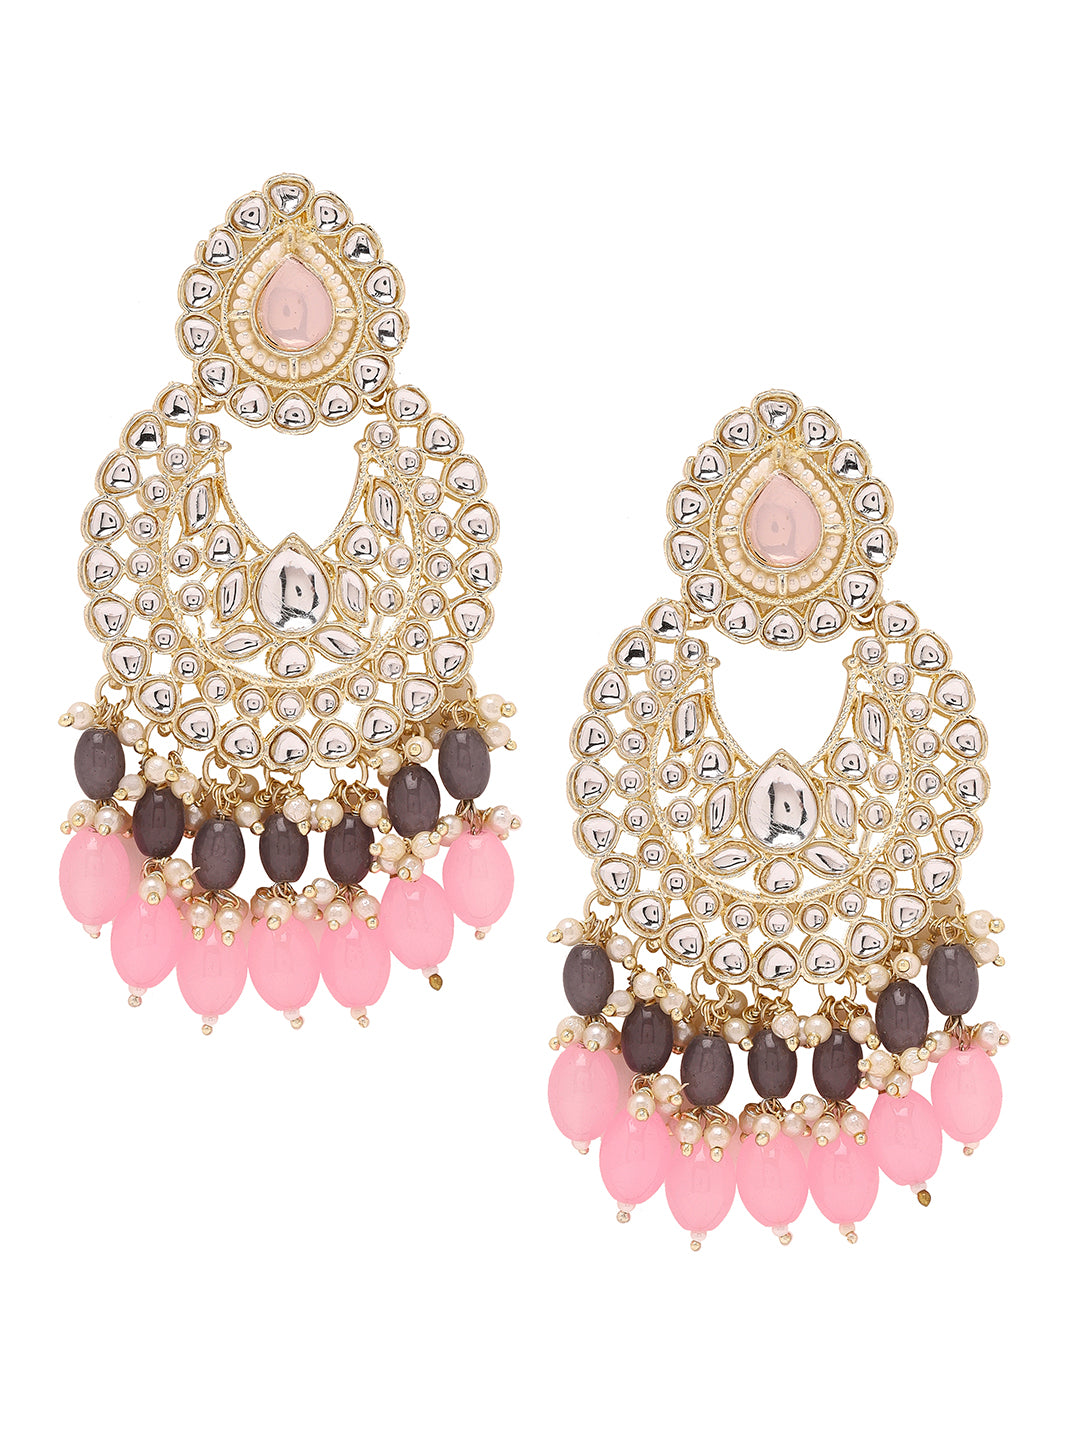 Priyaasi Exquisite Glamour Kundan Choker Set with Chandbali Earrings Adorned with Pink and Grey Stones